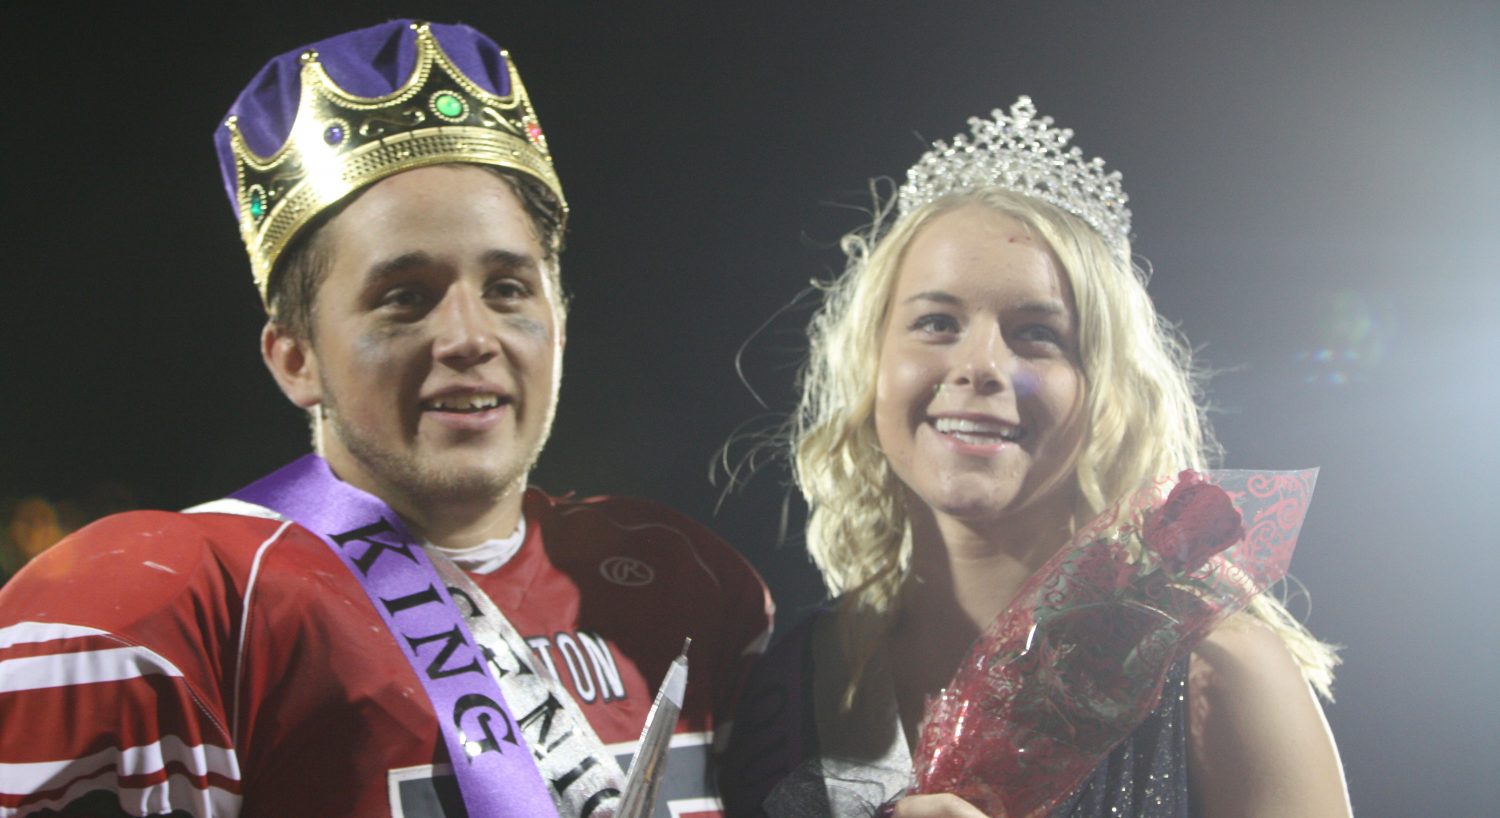 Lucas+Halferty+and+Caiden+Rexius+smile+as+they+celebrate+their+homecoming+coronation.+%28Photo+by+